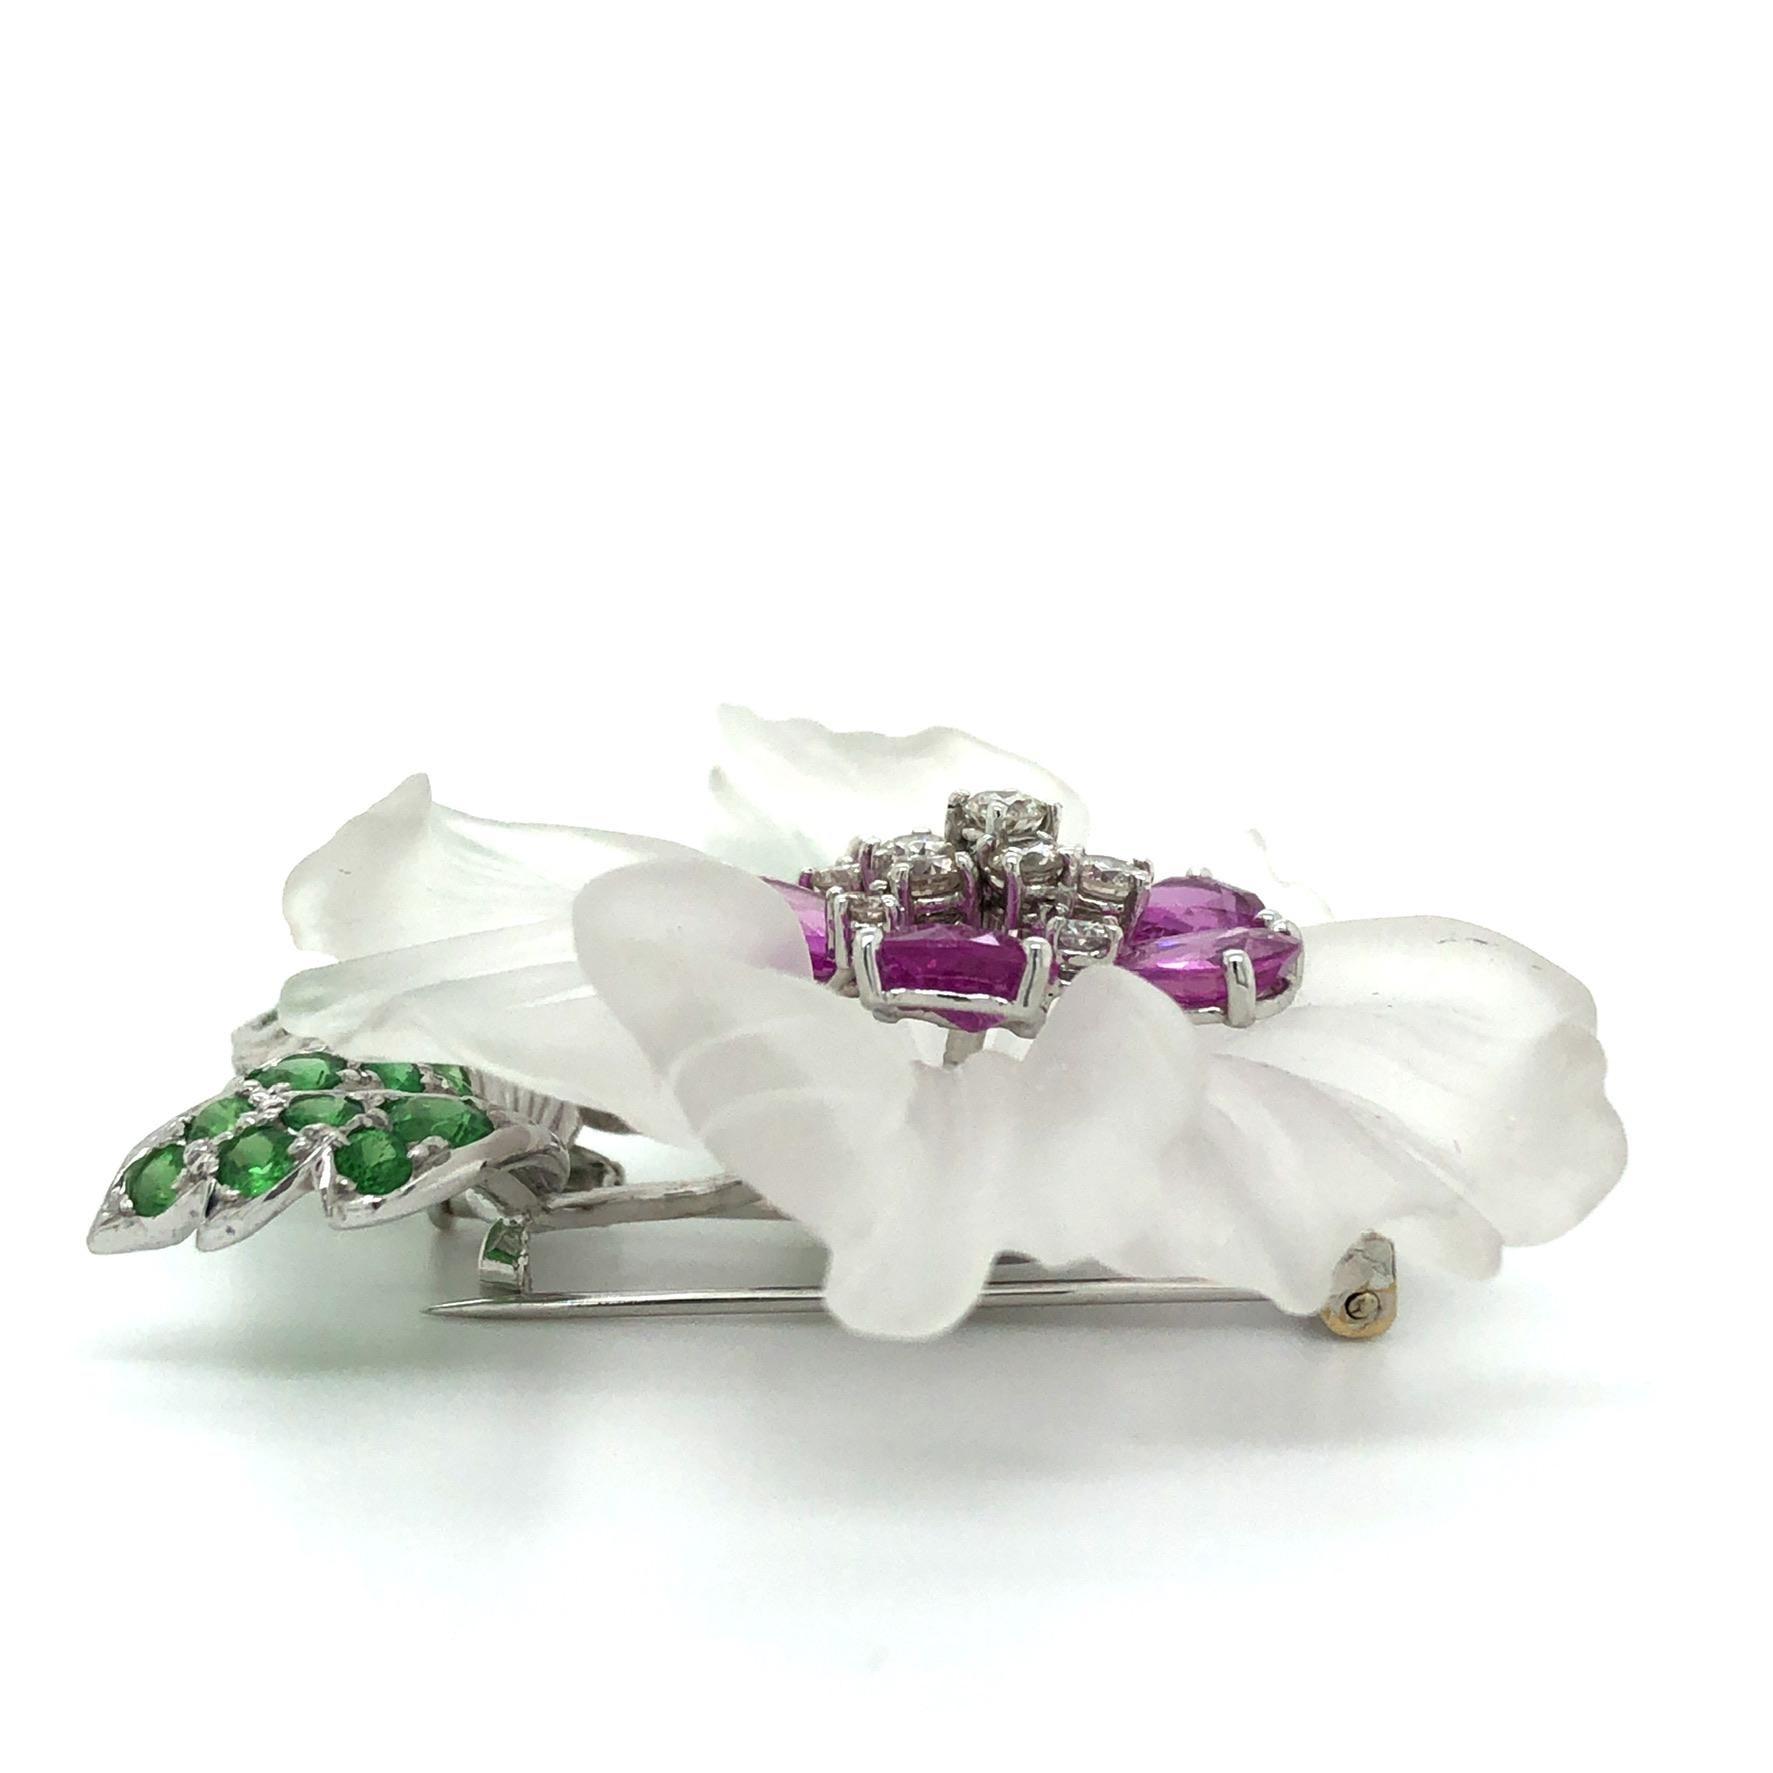 Incredibly detailed flower brooch with 1.50cts diamonds, G color, VS2 clarity, 5.66ct pink spinels and 3.47ct green spinels set in 18K white gold. Such an exquisite piece to add to your collection. You can also attach it to a chain and wear it as a